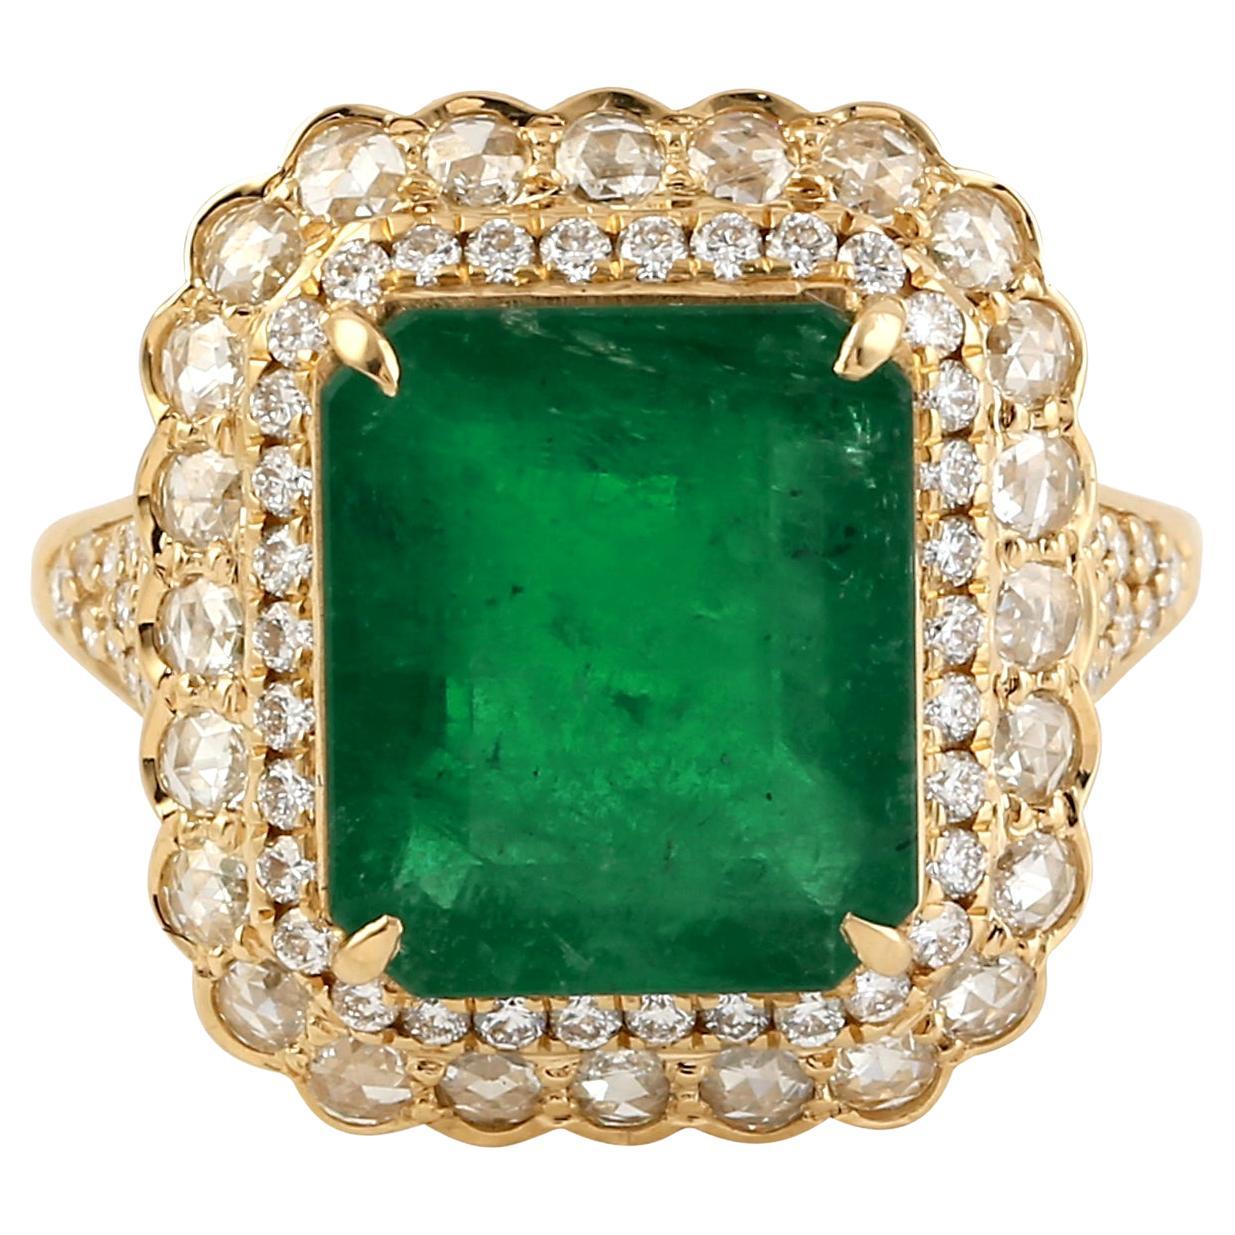 Octogen Shaped Zambian Emerald Cocktail Ring With Diamonds For Sale